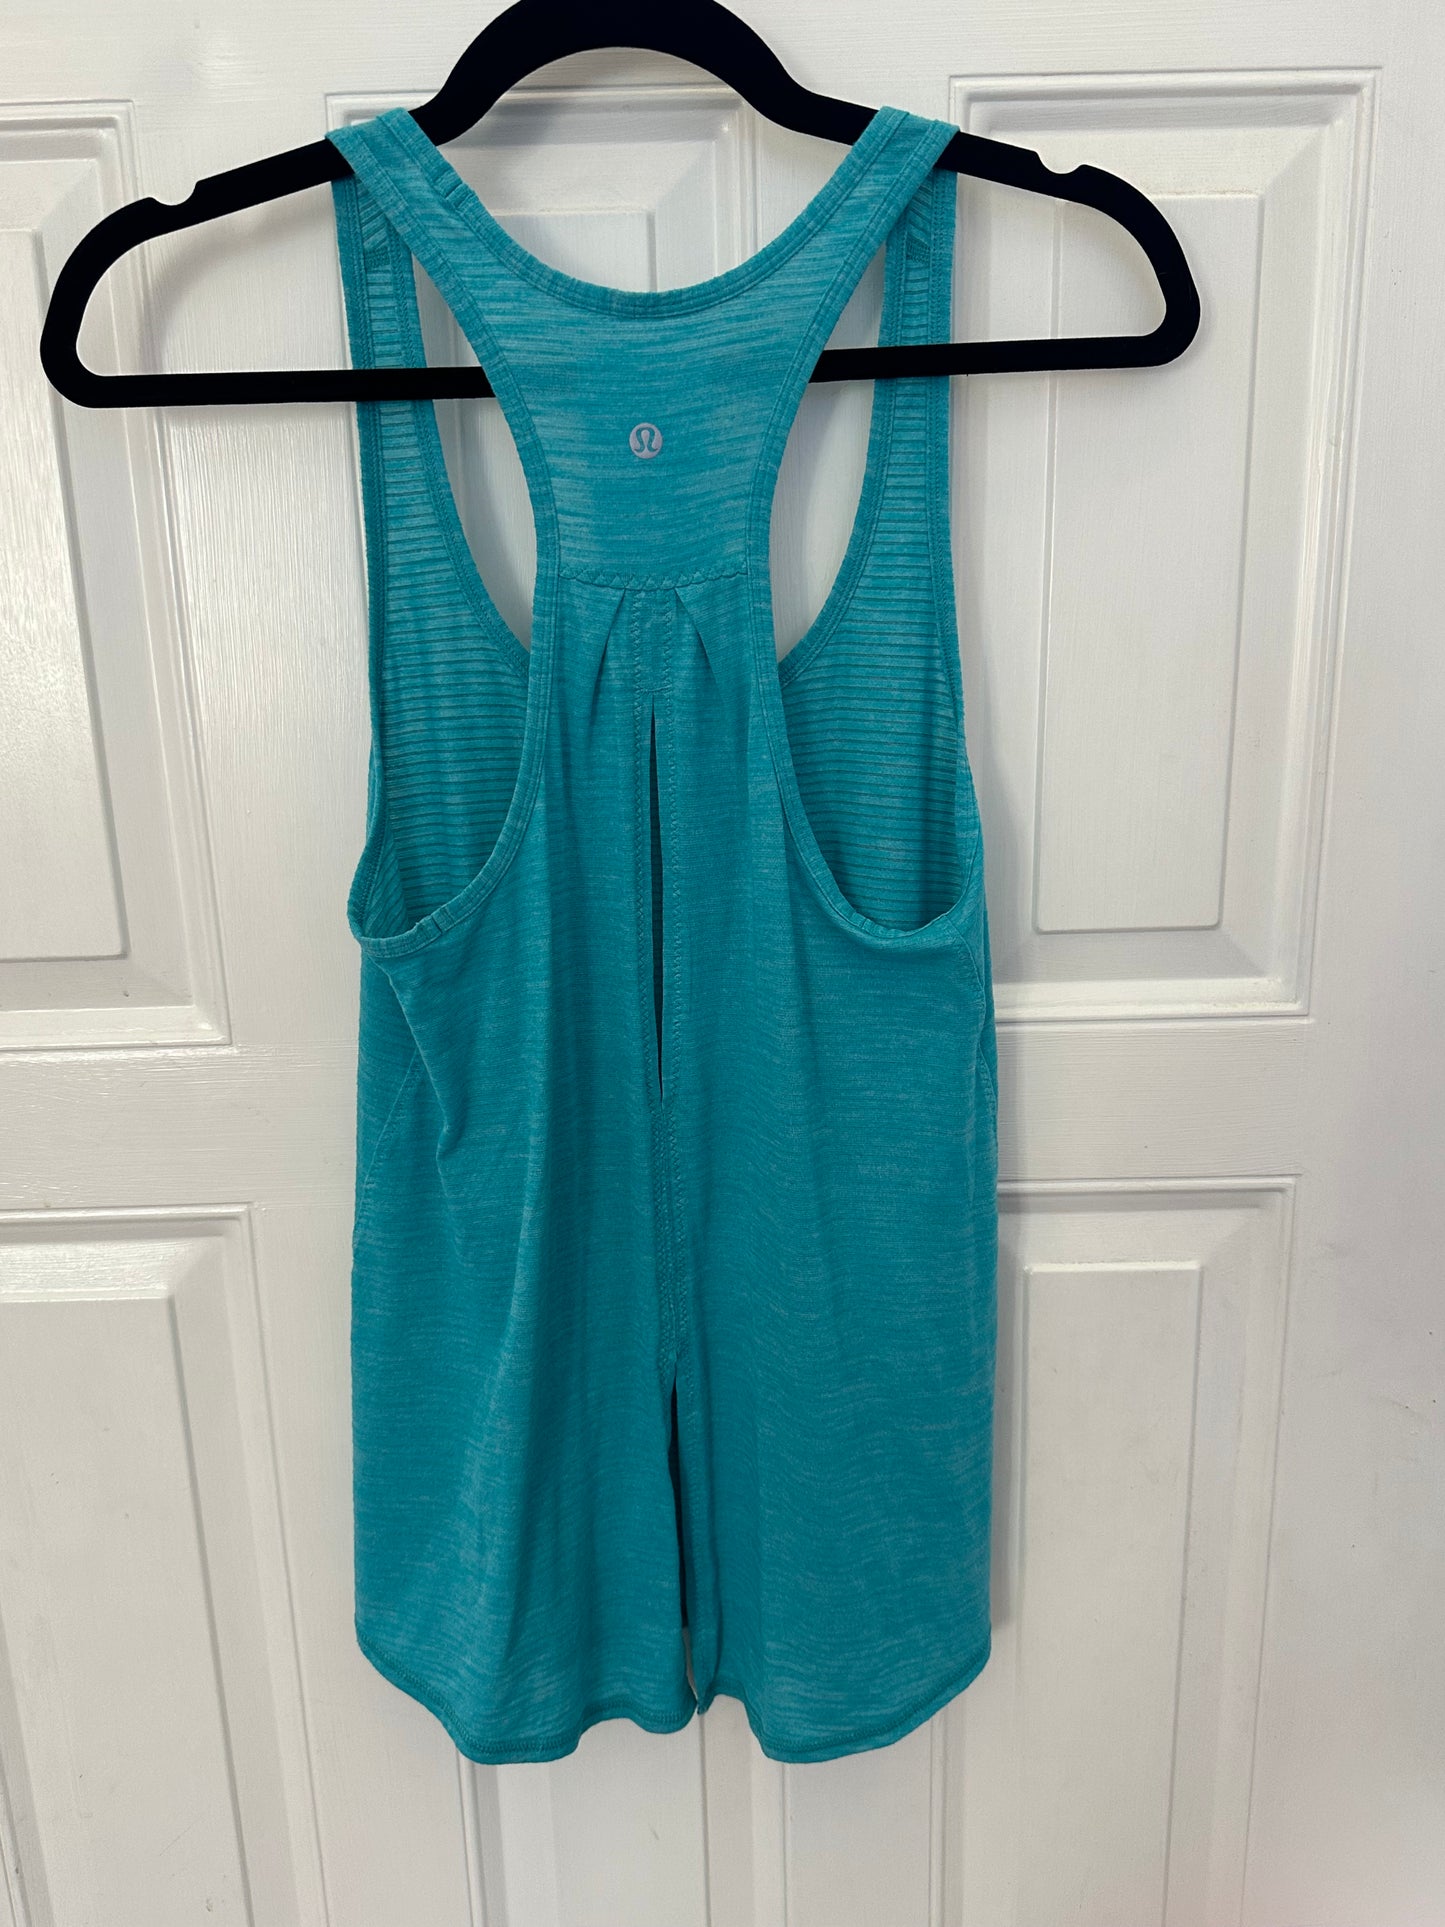 Lululemon Sz 4/6 Tank Top no size dot see below for measurements Pick up in Milford 45244